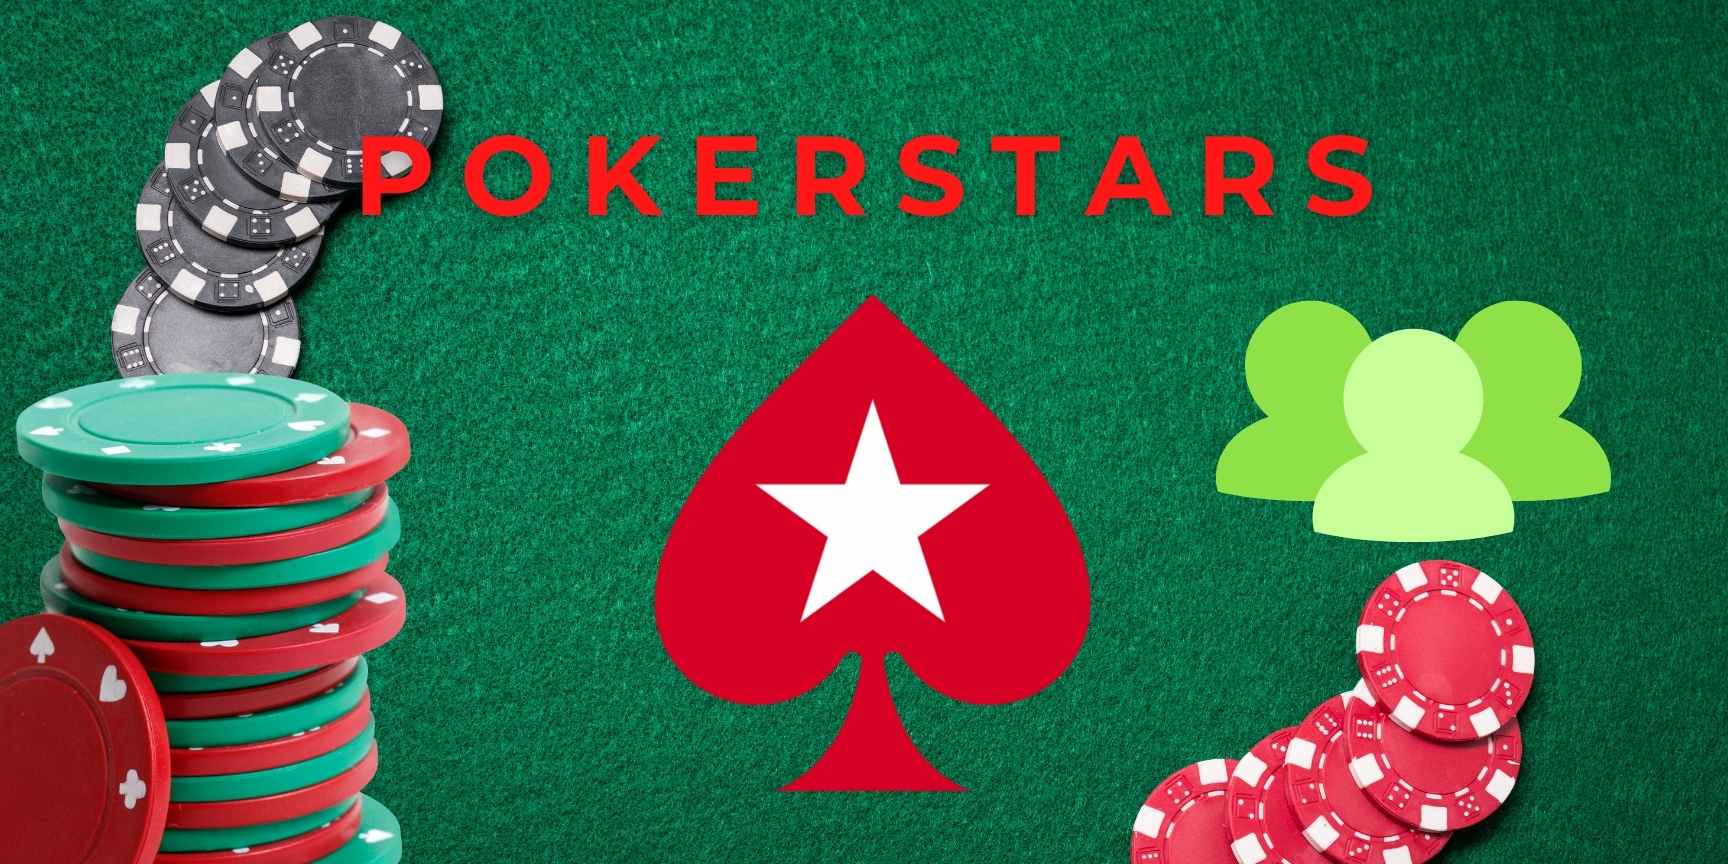 How does Pokerstars attract the interest of millions of players around the world?